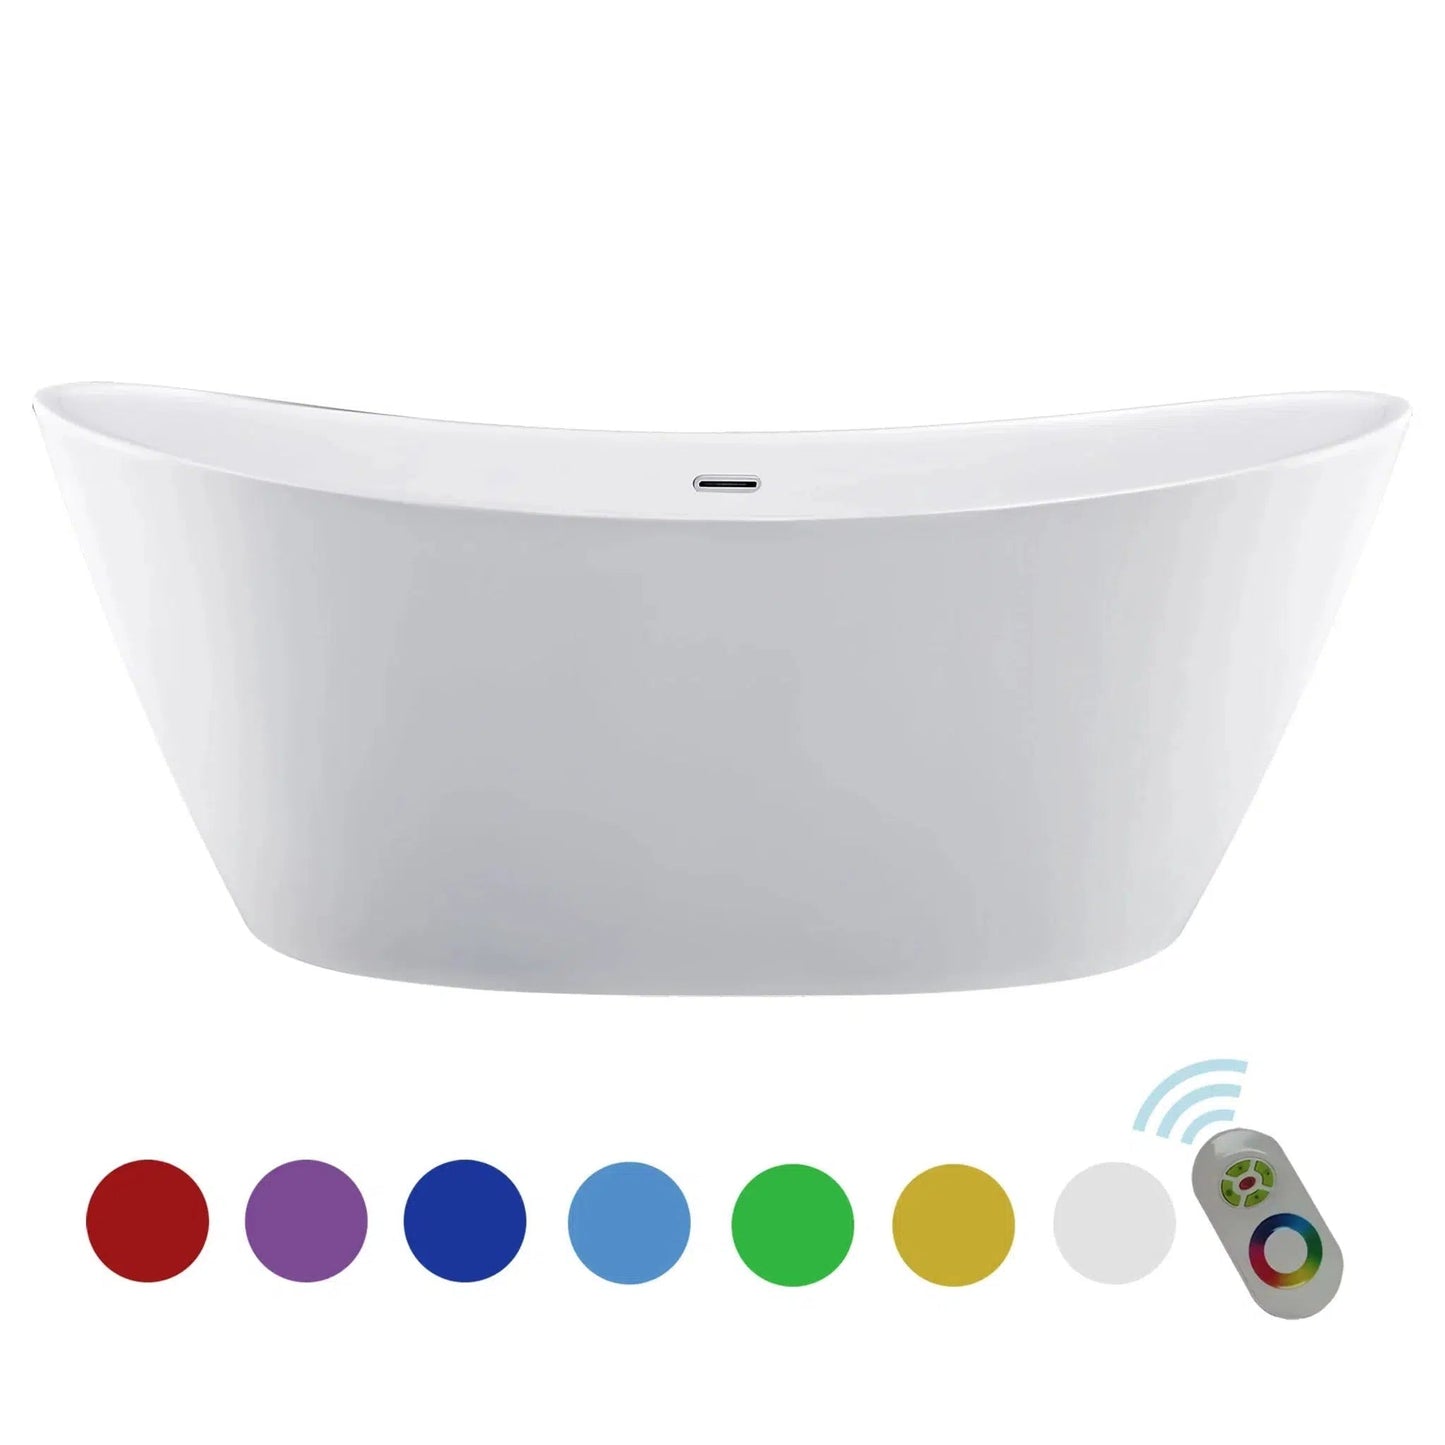 Empava 67" White Freestanding Oval Soaking Bathtub With LED Strip Below With Center Drain